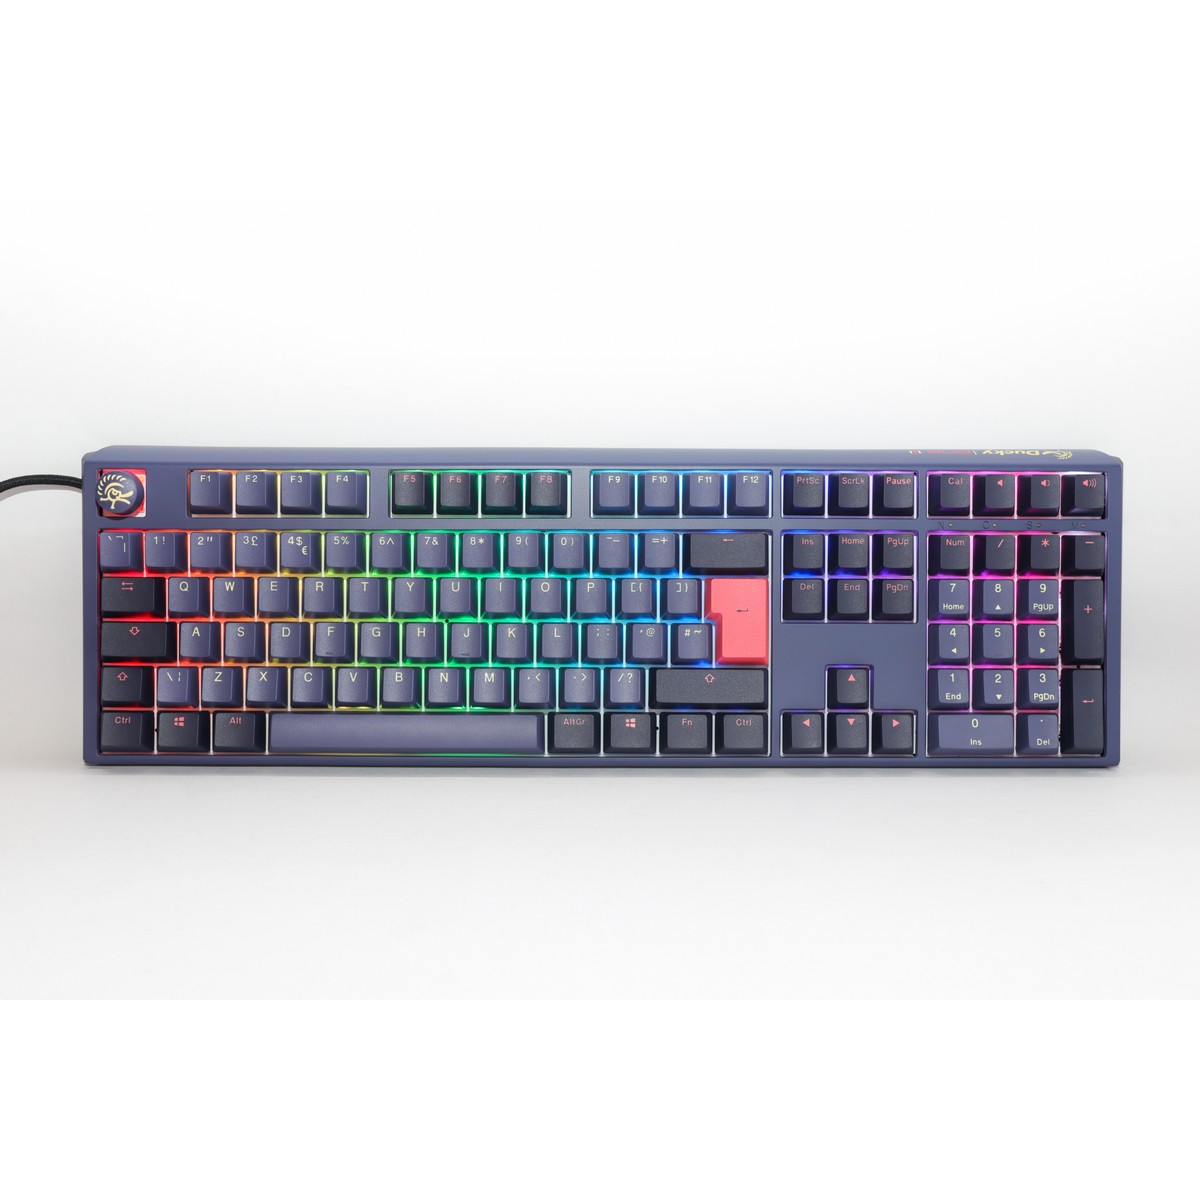 Ducky - Ducky One 3 Cosmic USB RGB Mechanical Gaming Keyboard Cherry MX Red Switch - UK Layout